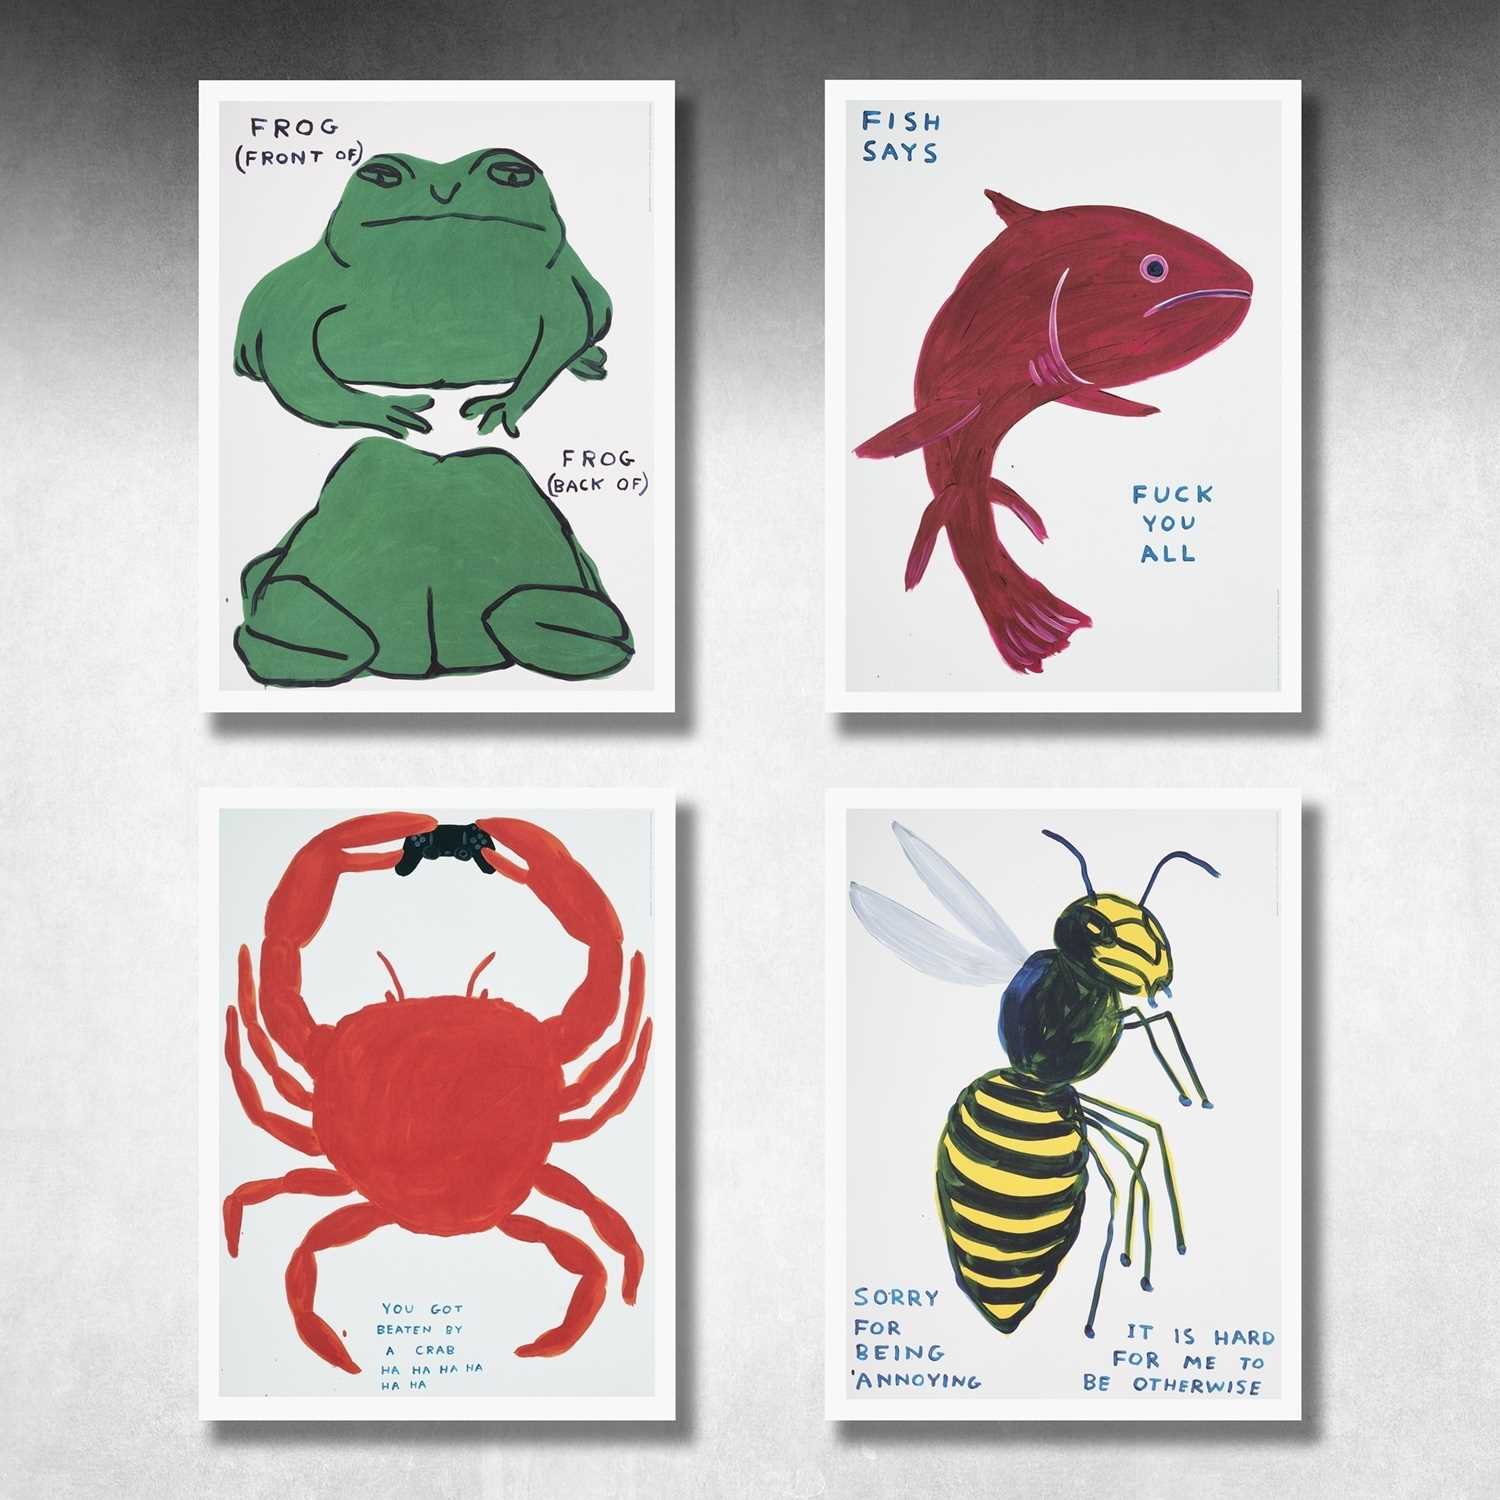 Lot 23 - David Shrigley (British 1968-), 'Fish Says Fuck You All, Frog (Front Of) Frog (Back Of), Sorry For Being Annoying & You Got Beaten By A Crab', 2022